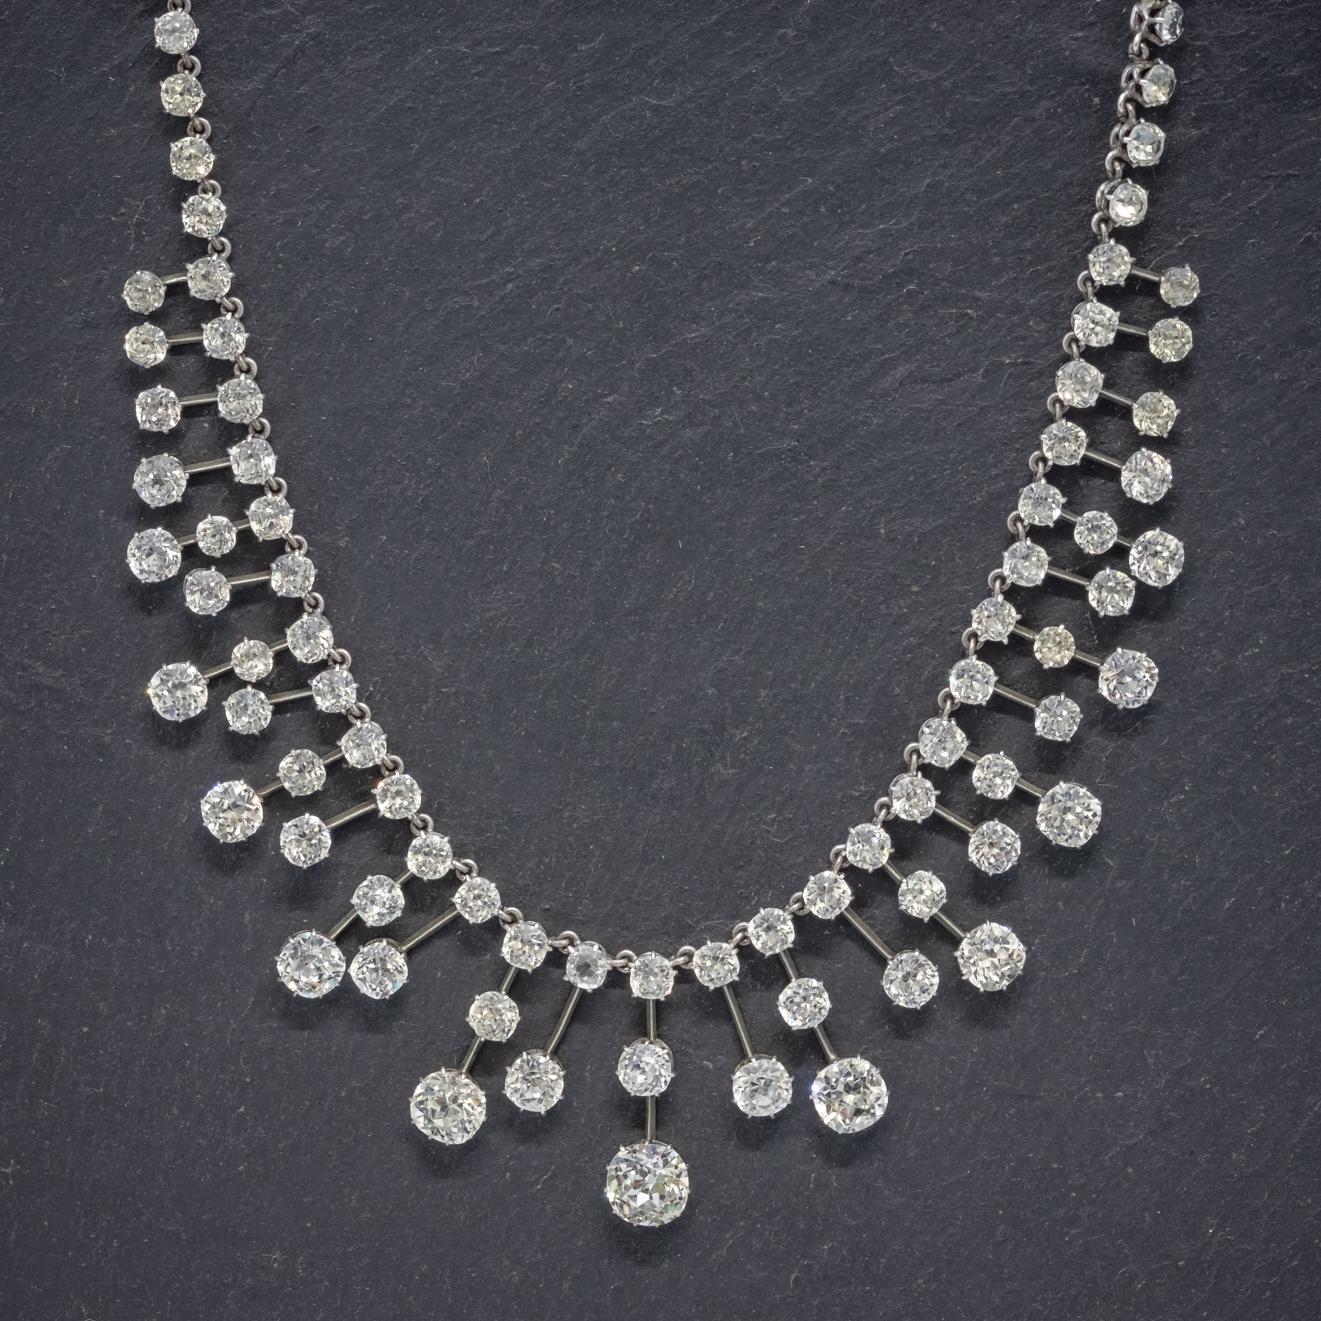 An extraordinary antique French Garland necklace dating Circa 1860. The glamorous piece is decorated with twenty-nine beautiful old cut Paste droppers which sparkle bright like a cascade of Diamonds.

These are some of the finest Paste stones we